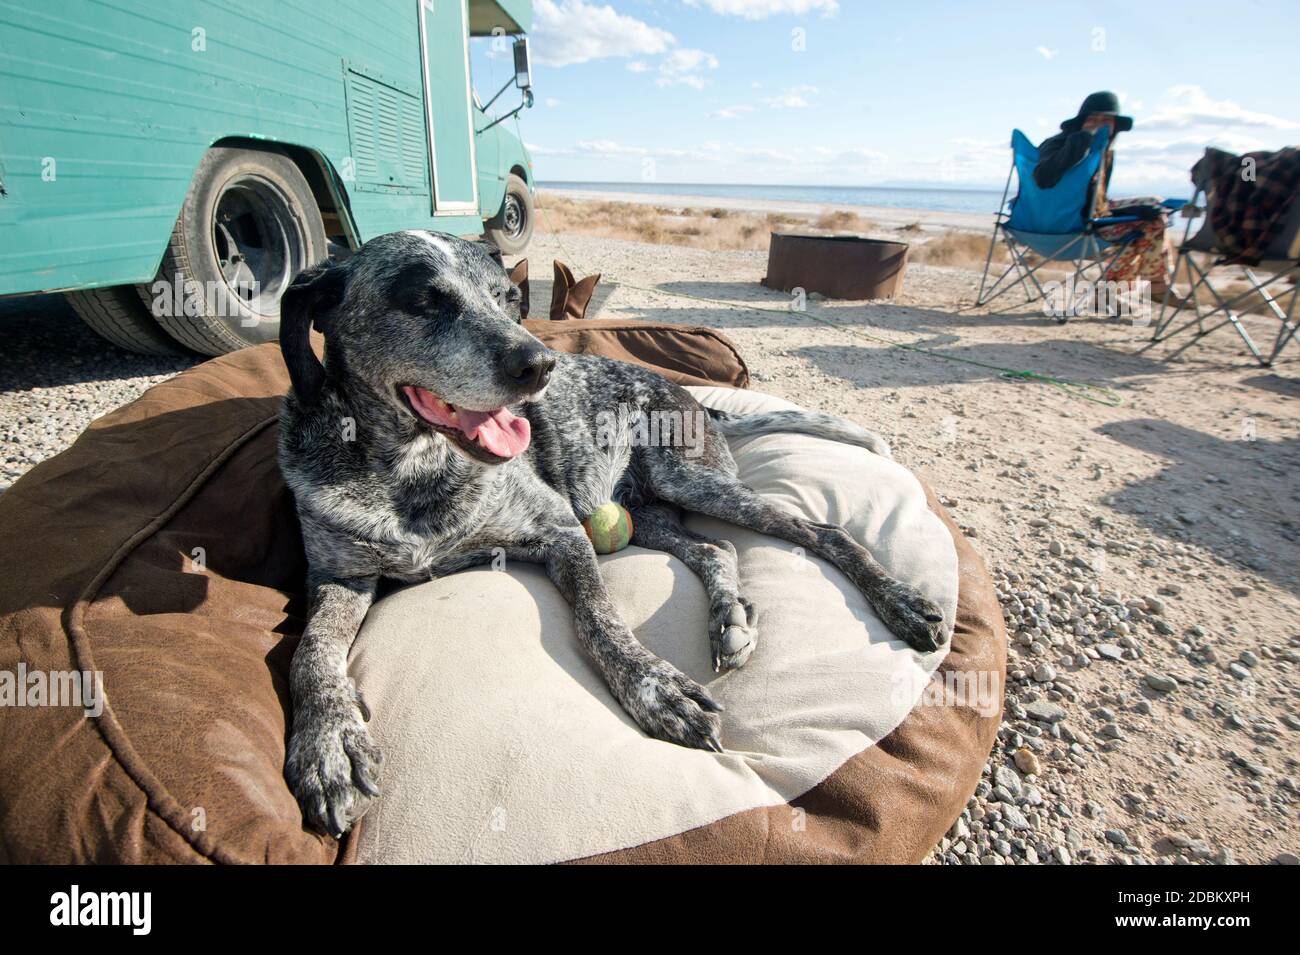 Dog relaxing on pet bed, California, USA Stock Photo